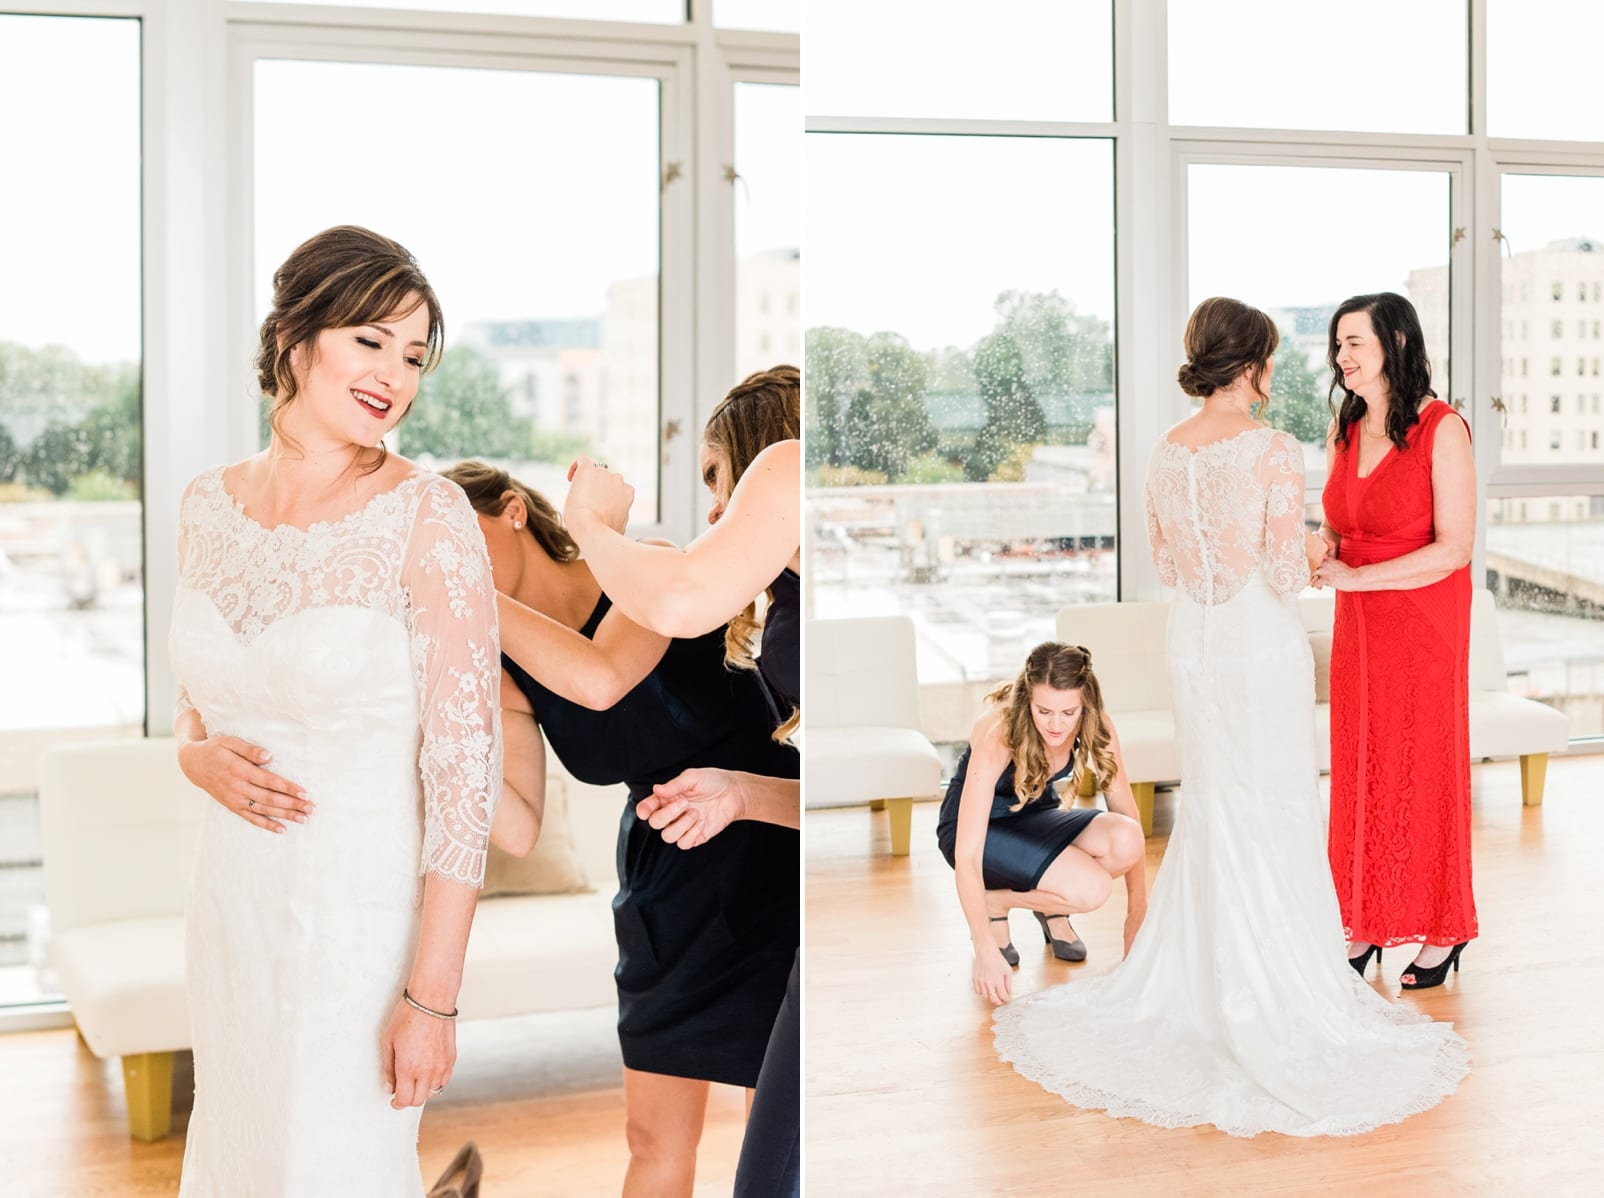 The Glass Box bride getting dressed with her bridesmaids and her mother photo